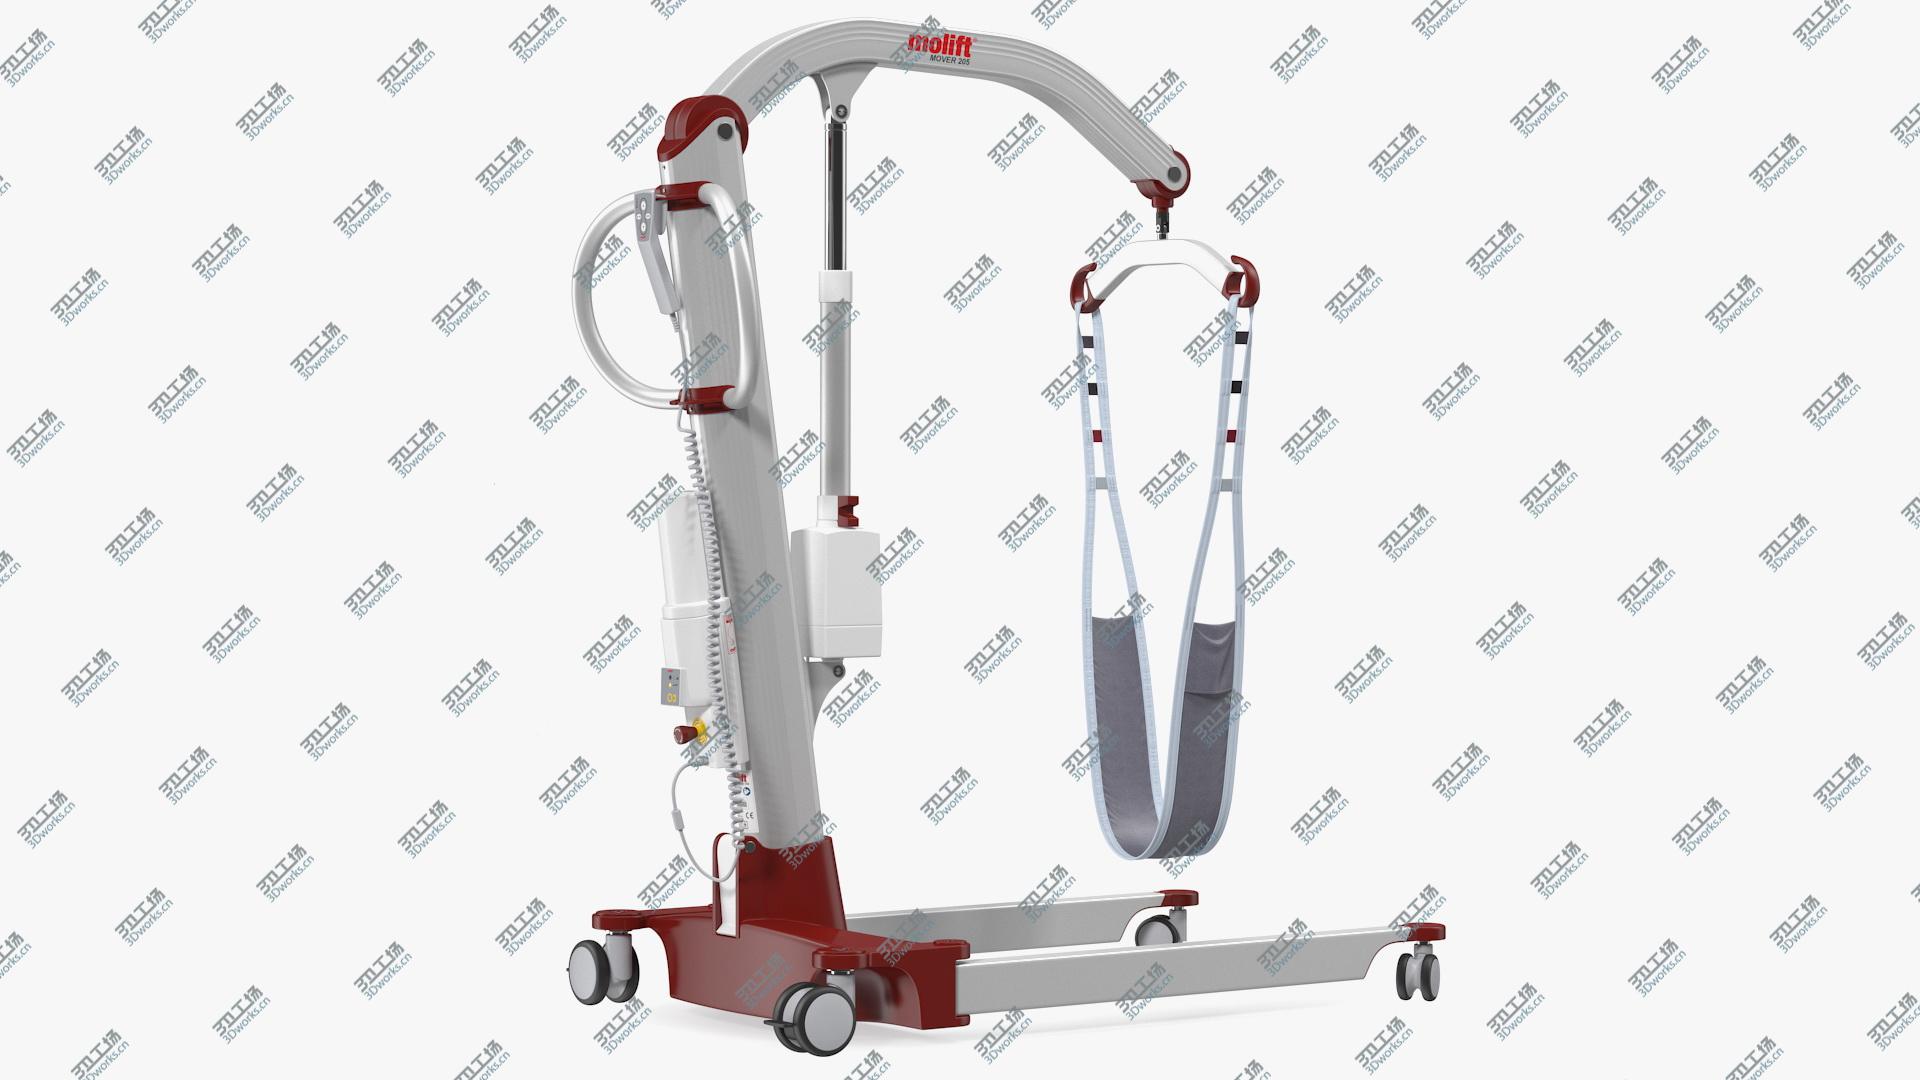 images/goods_img/202104091/Patient Lift Molift Mover 205 with FlexiStrap Rigged 3D model/1.jpg